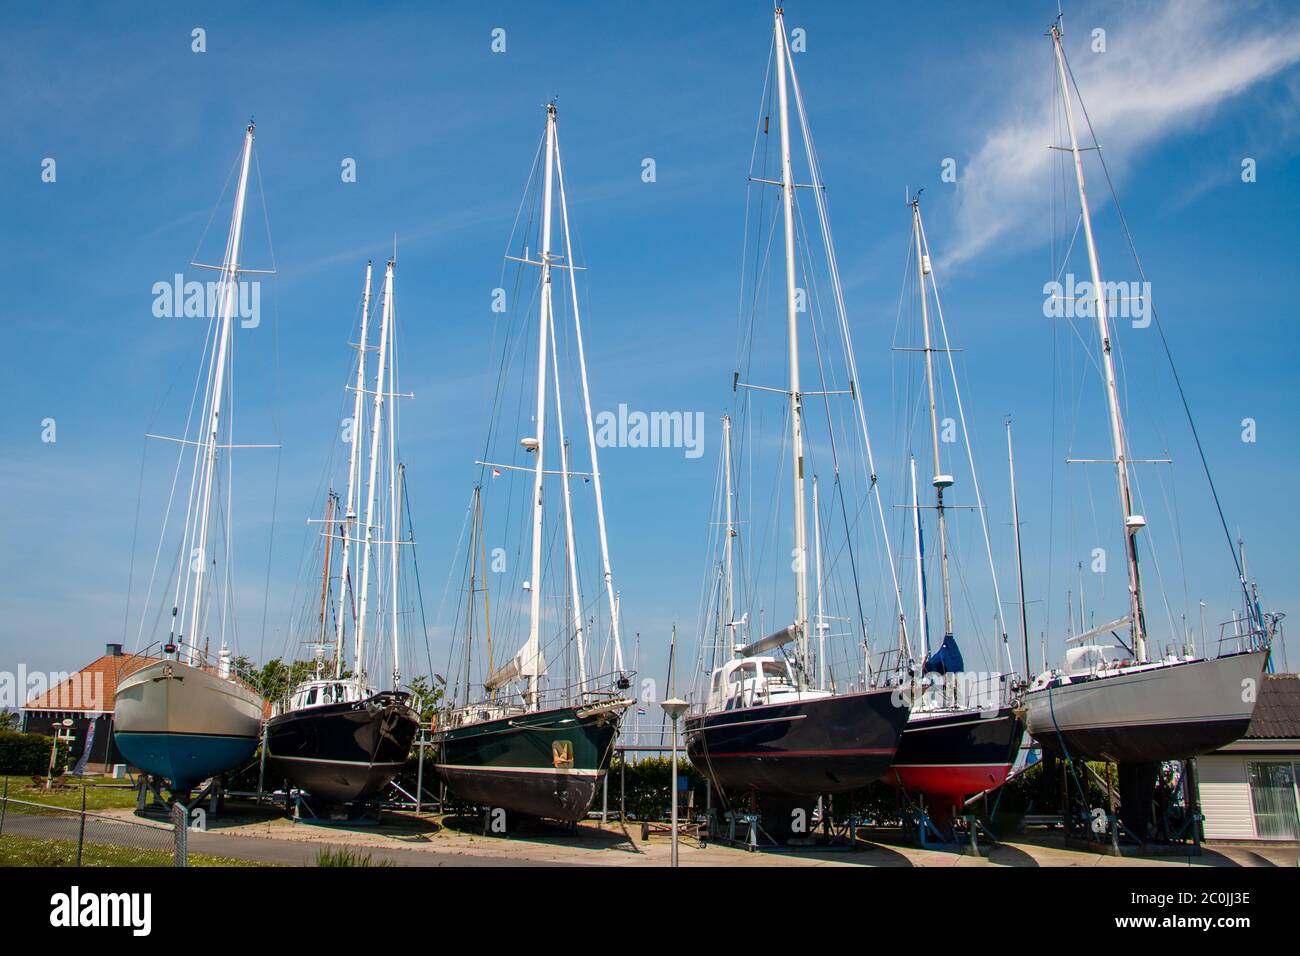 Shipyard with large sailing boats on dry land in the Netherlands in the  town of Hindeloopen, province of Friesland Stock Photo - Alamy